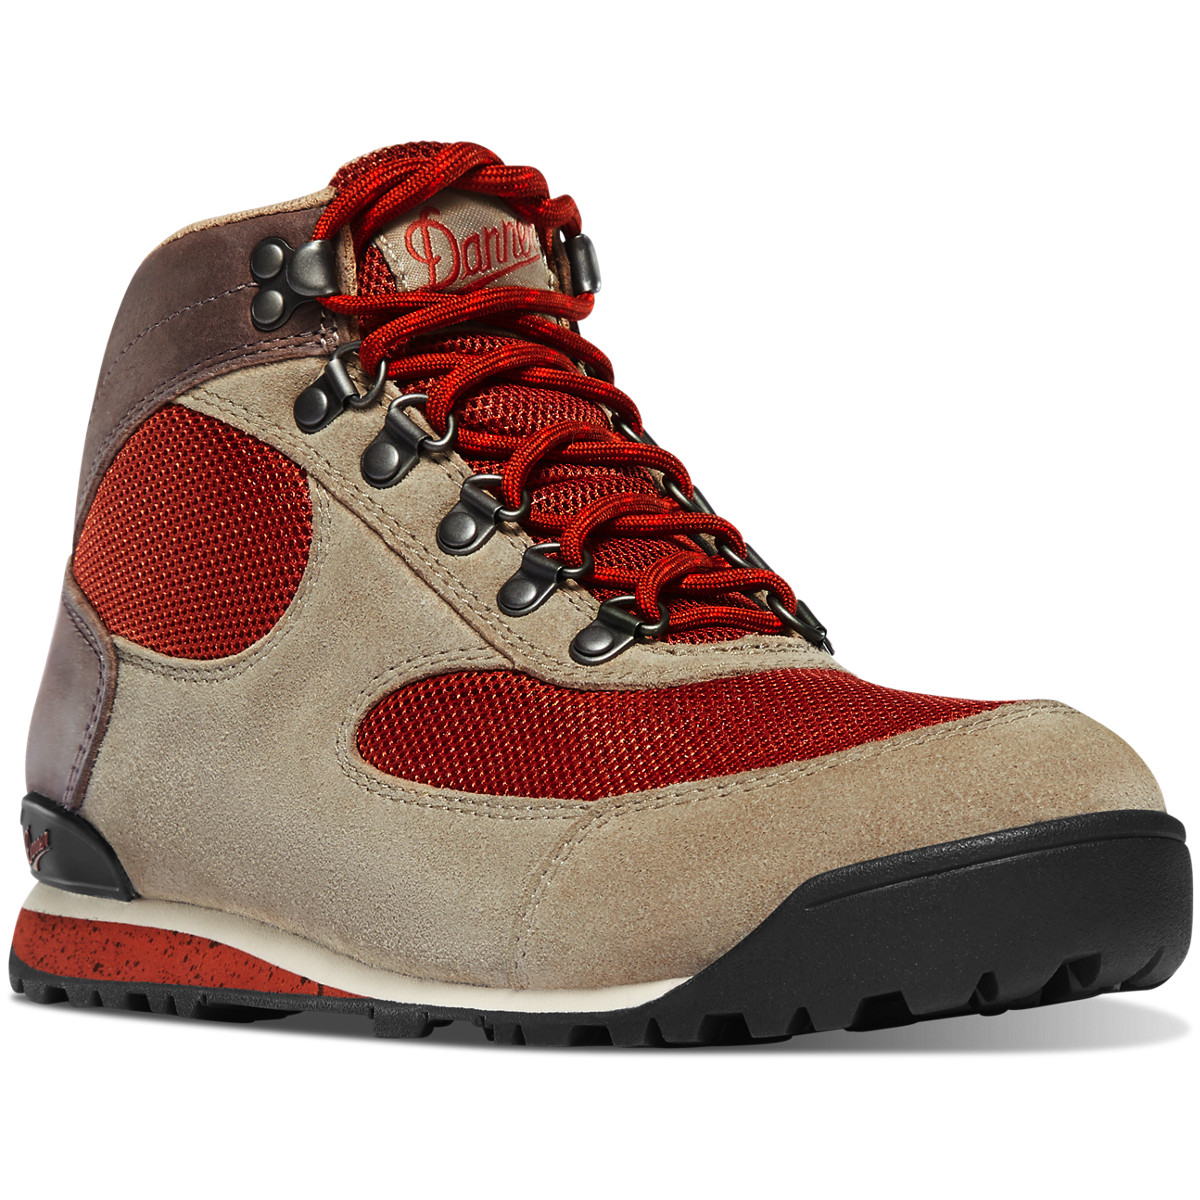 Danner Womens Jag Dry Weather Hiking Boots Khaki/Red - SHG542791